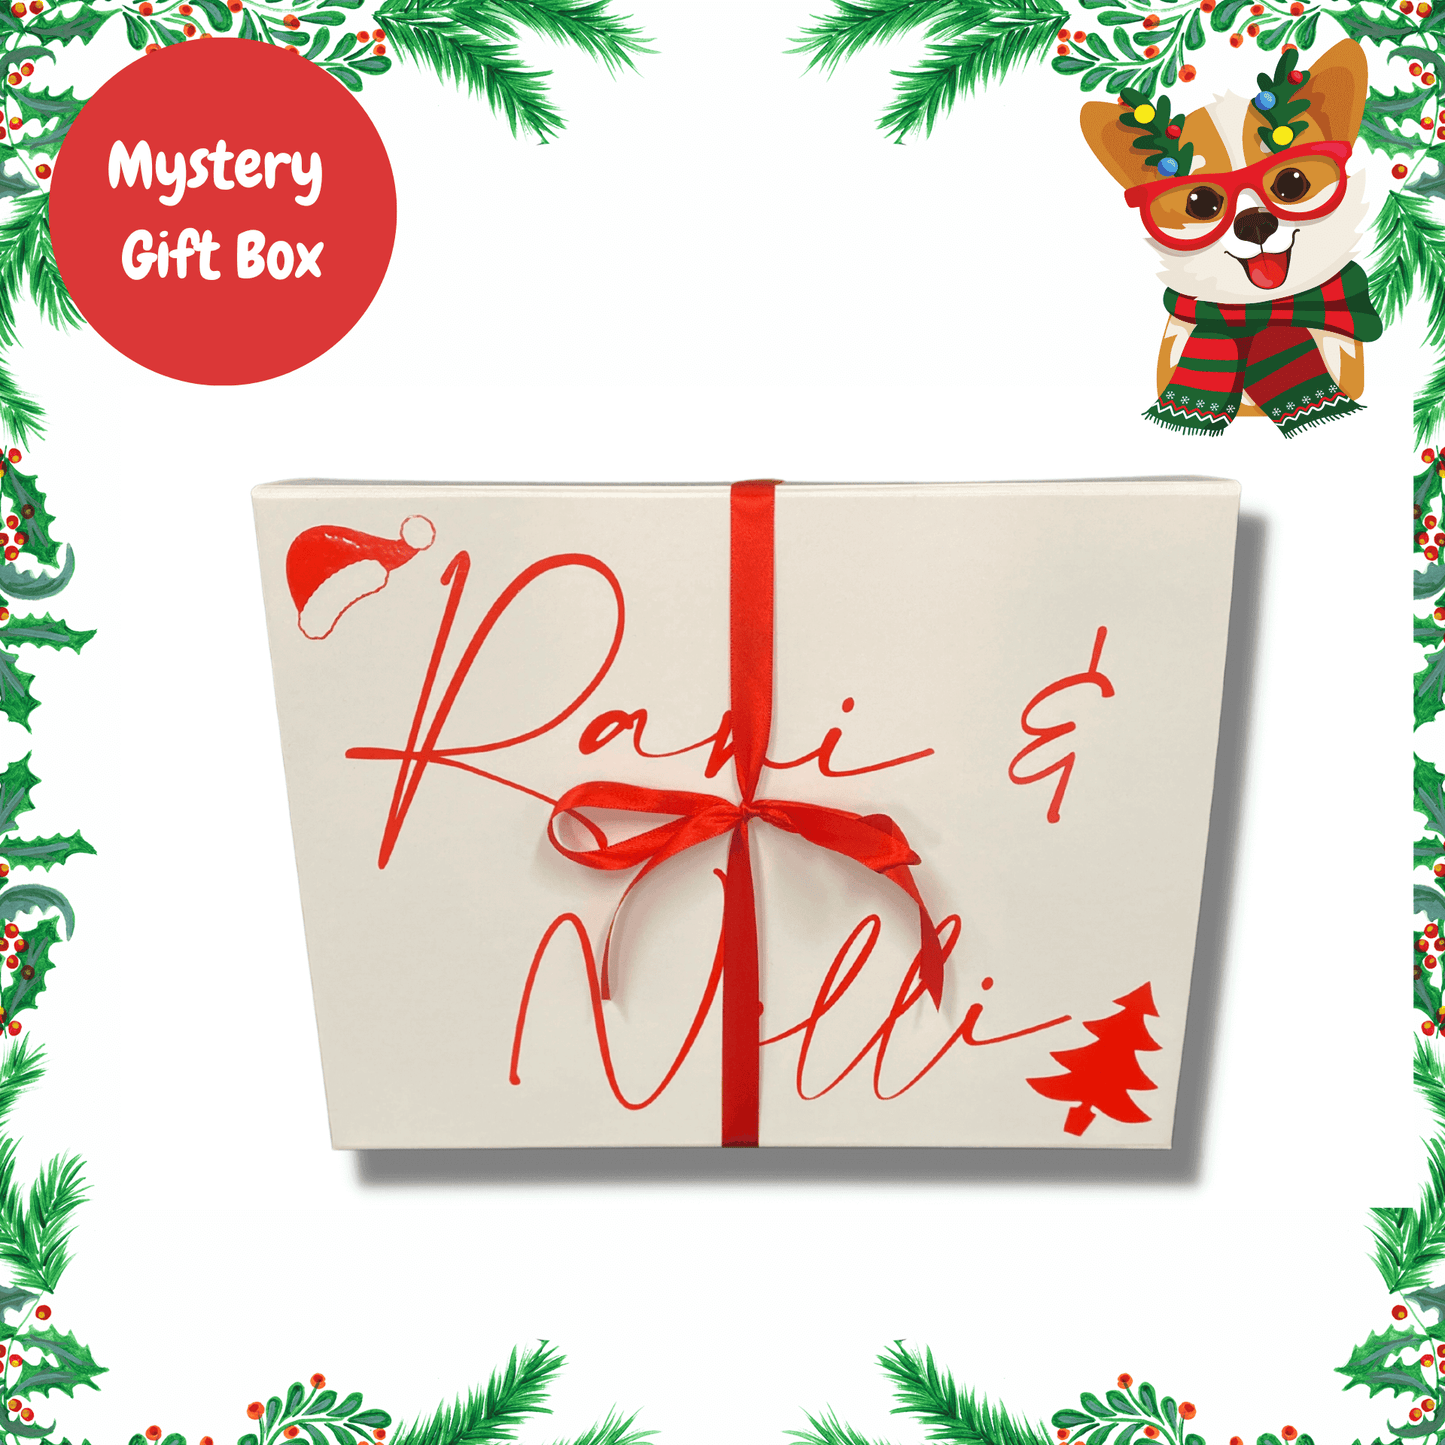 Christmas dog gift personalised box, let's pawty 